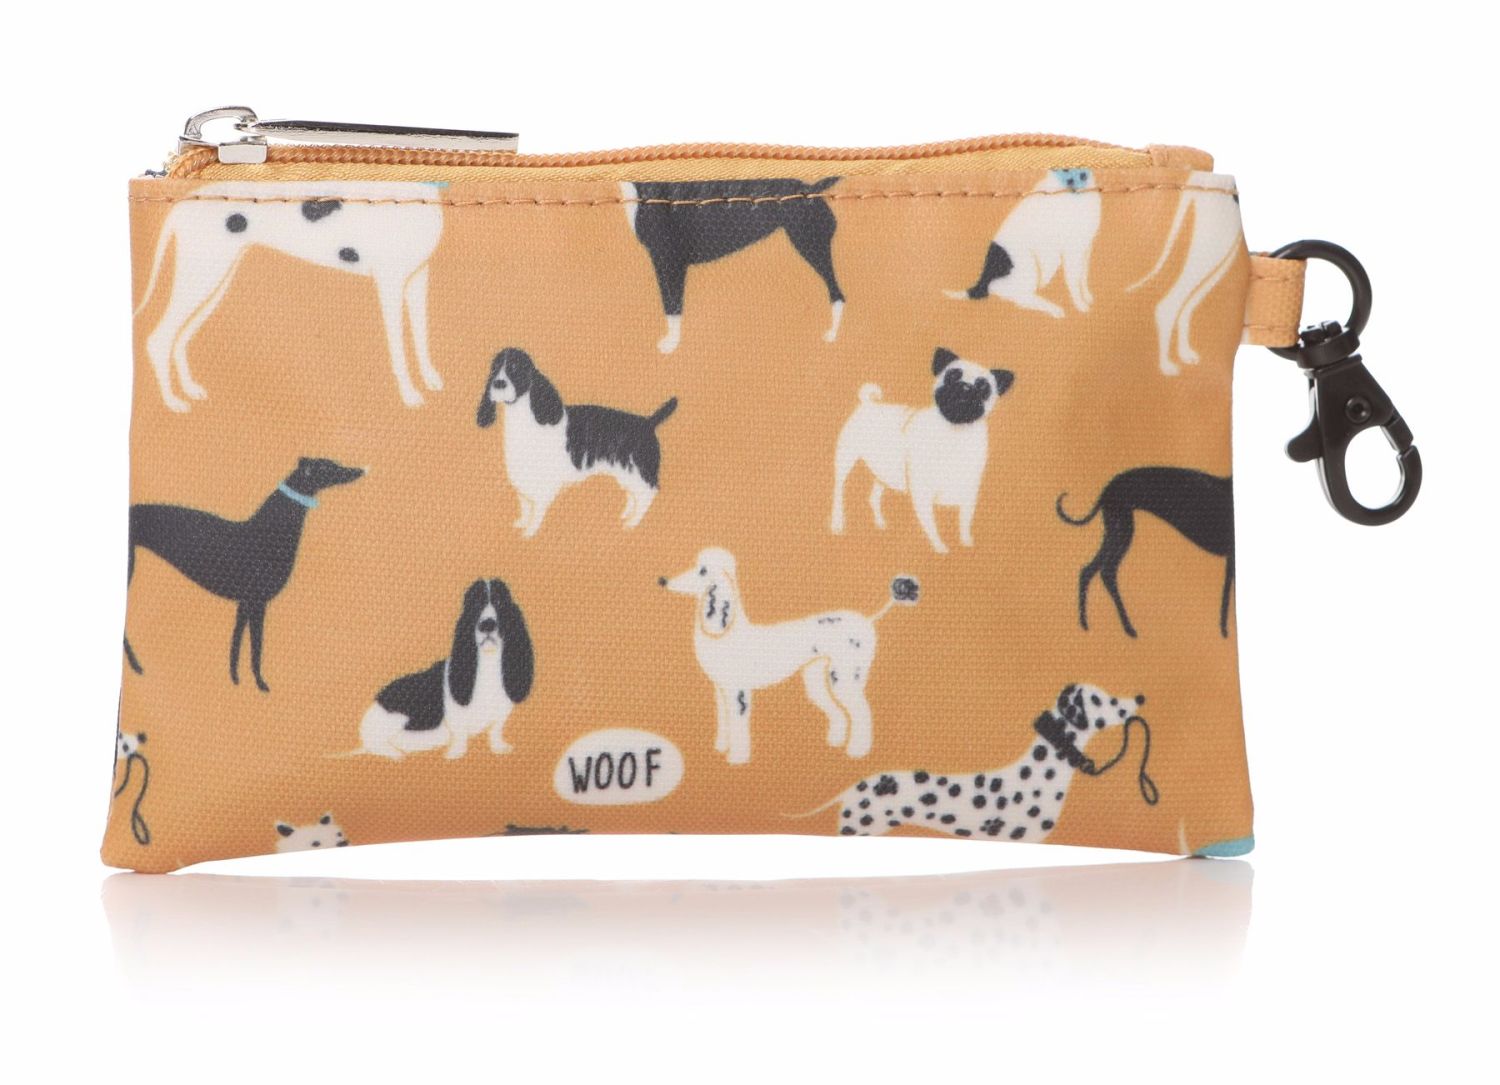 Ralph Lauren's Accessories -- Modeled by Adorable Doggies | Dog walking, Puppy  purse, Dogs